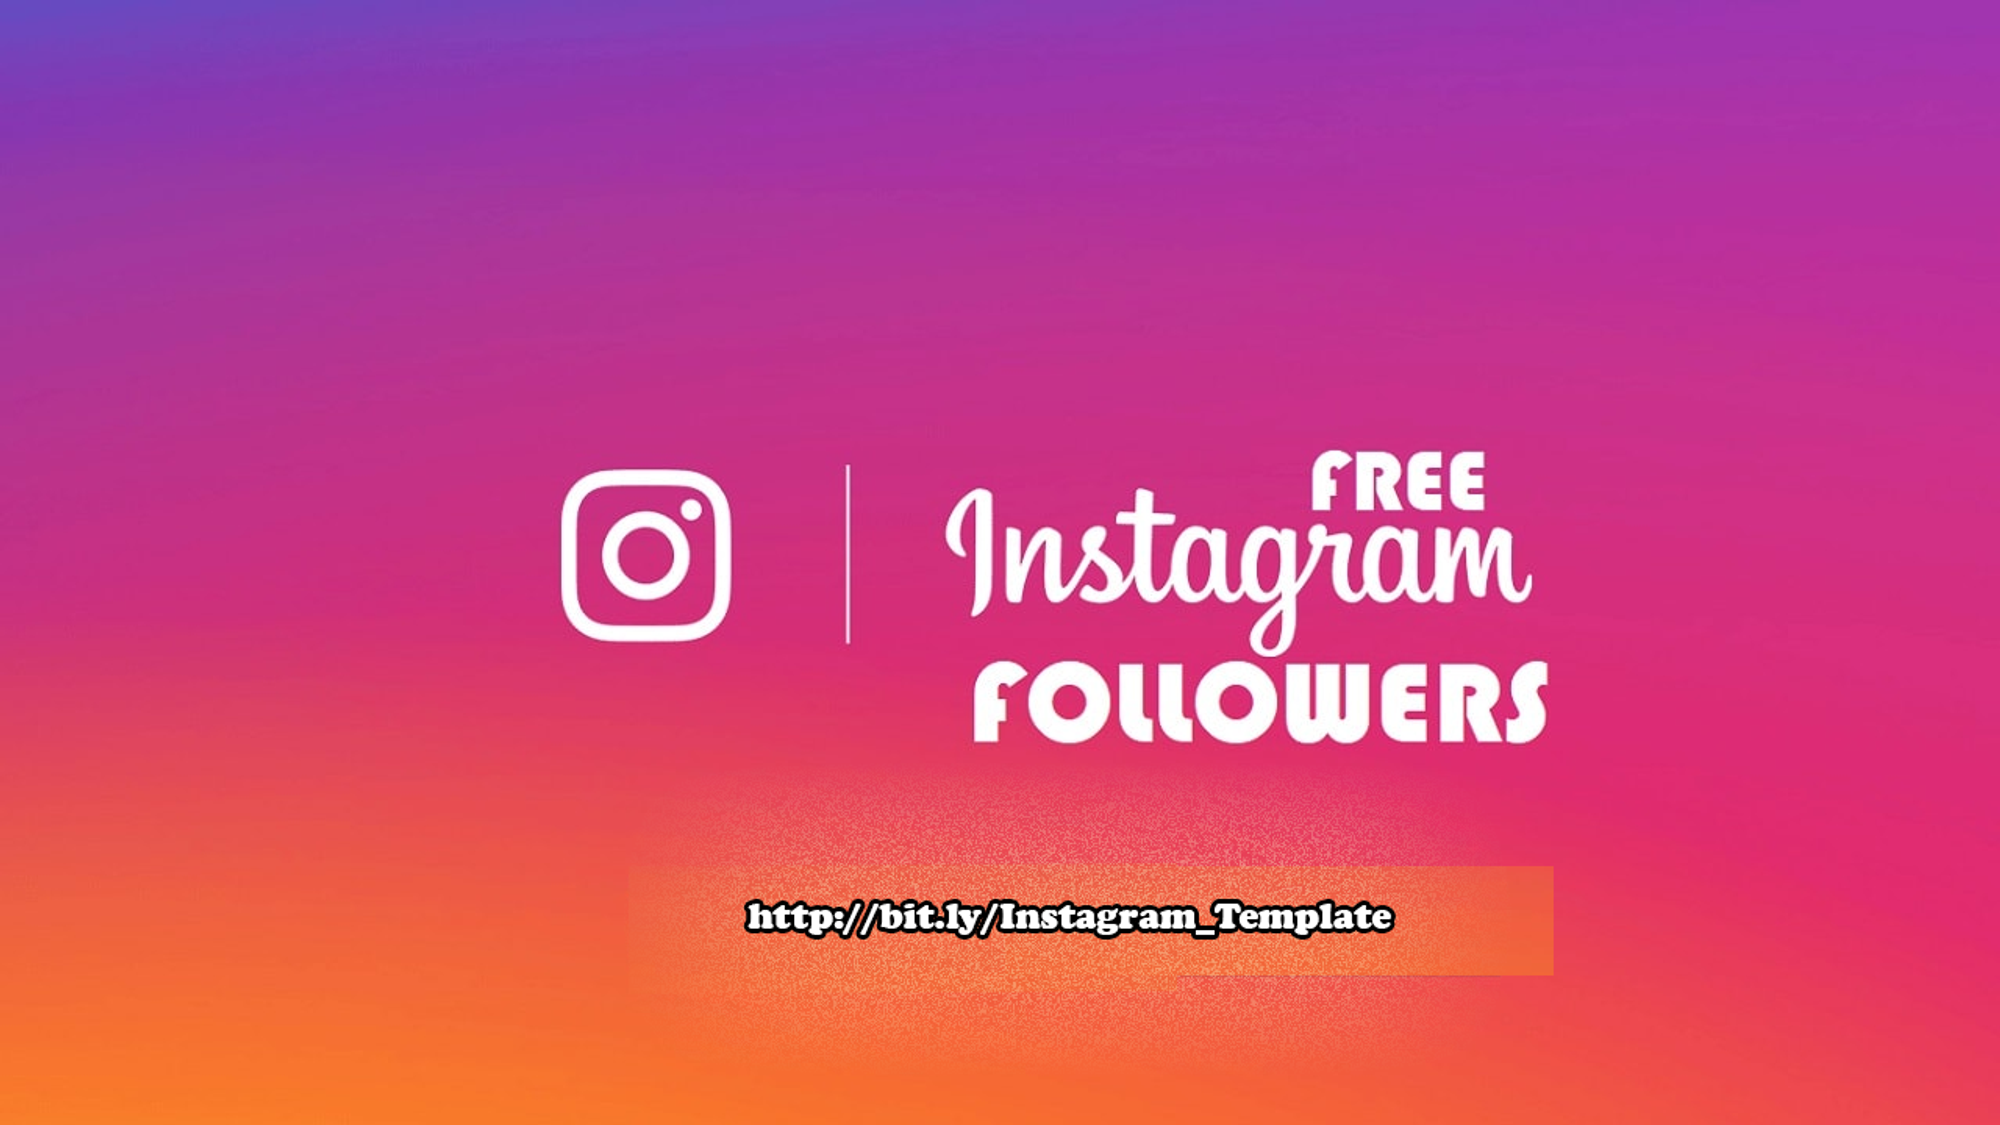 (2020) How to Get Free Instagram Followers | Instagram ... - 1280 x 720 png 460kB